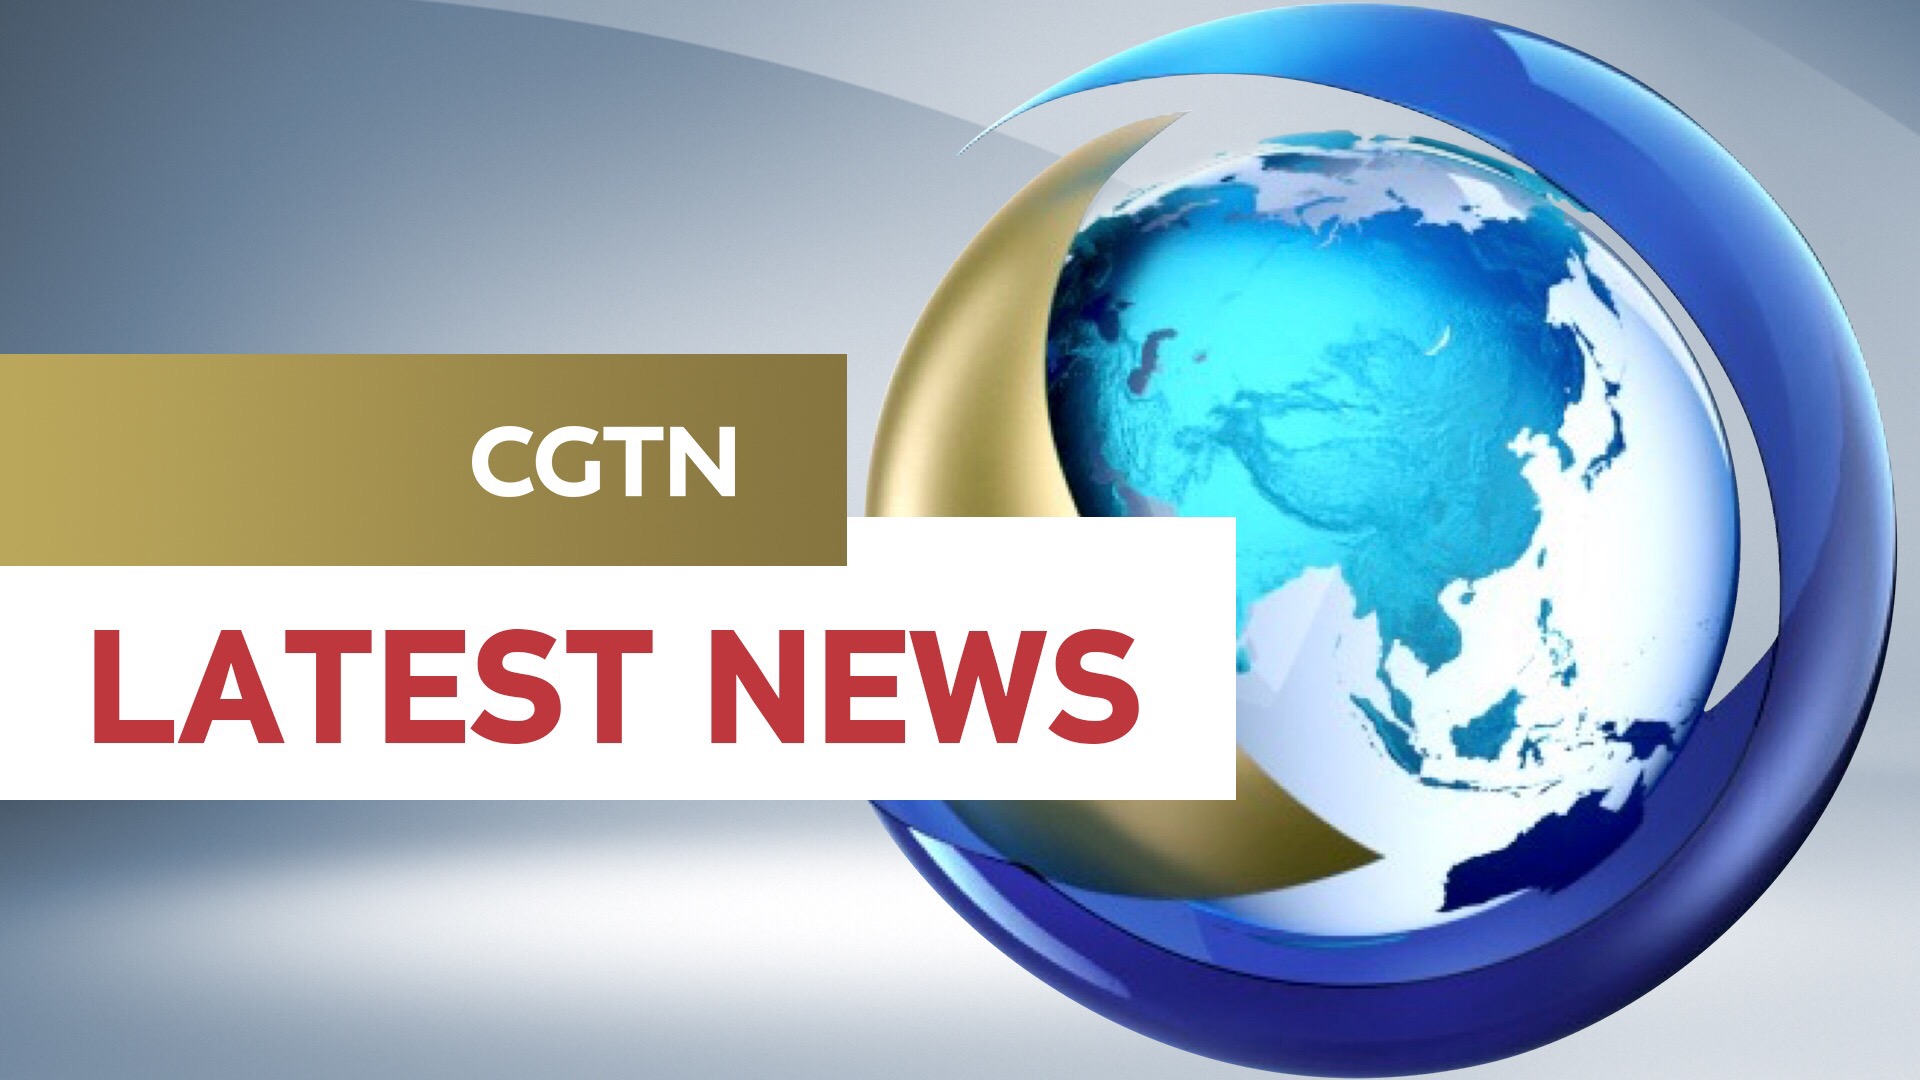 At least 19 killed in bus crash in Cameroon